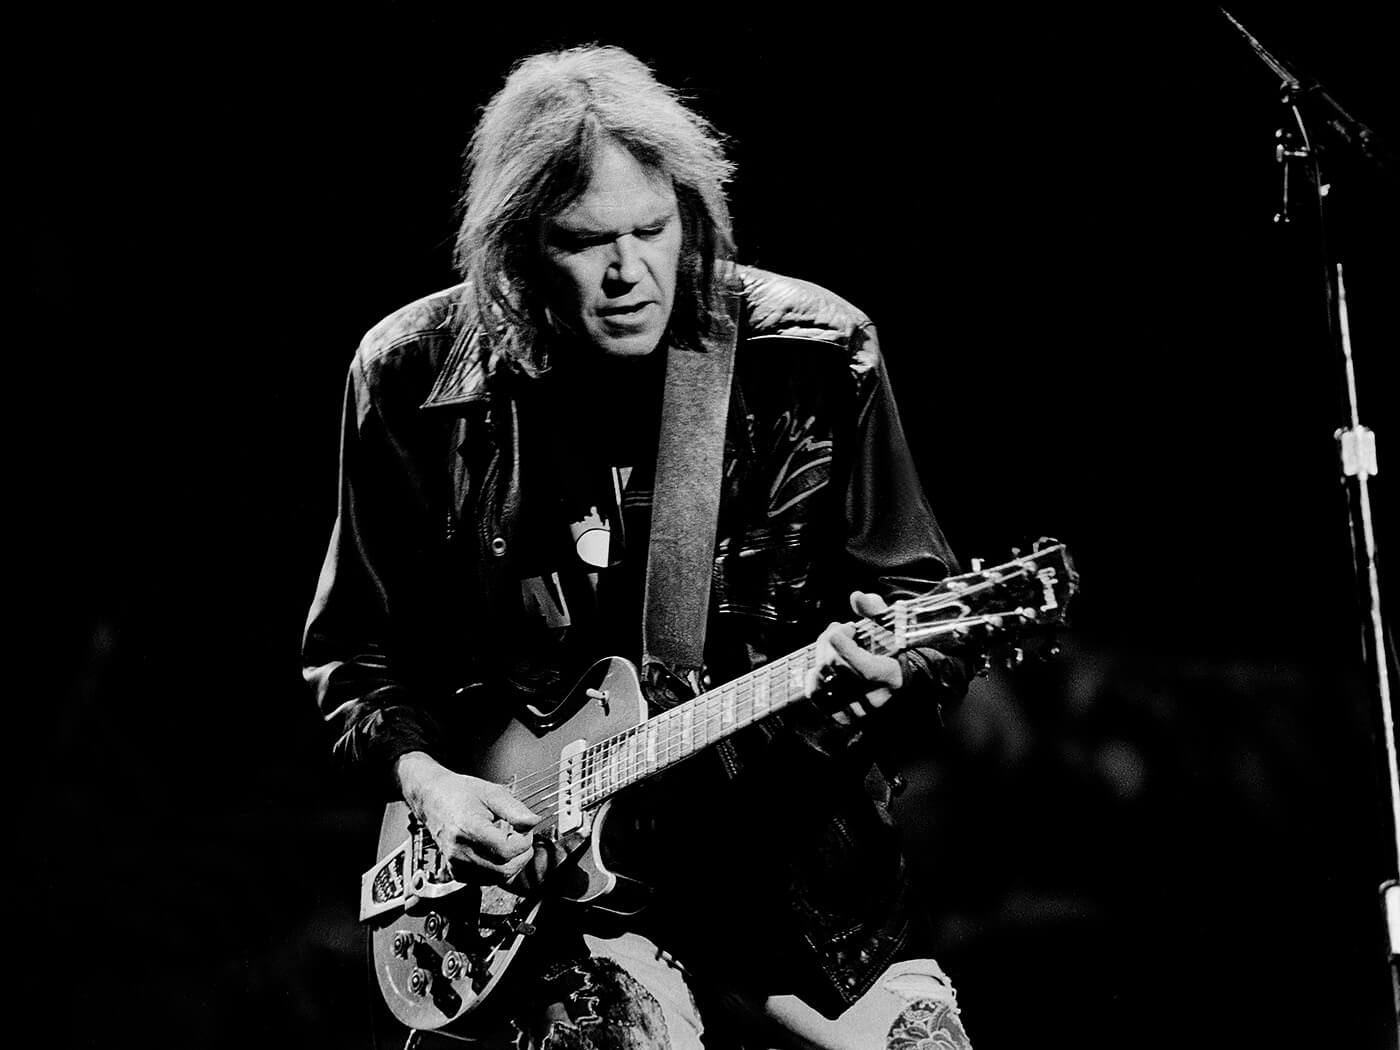 Neil Young plays guitar as he performs onstage during the Farm Aid benefit concert, Indianapolis, Indiana, April 7, 1990